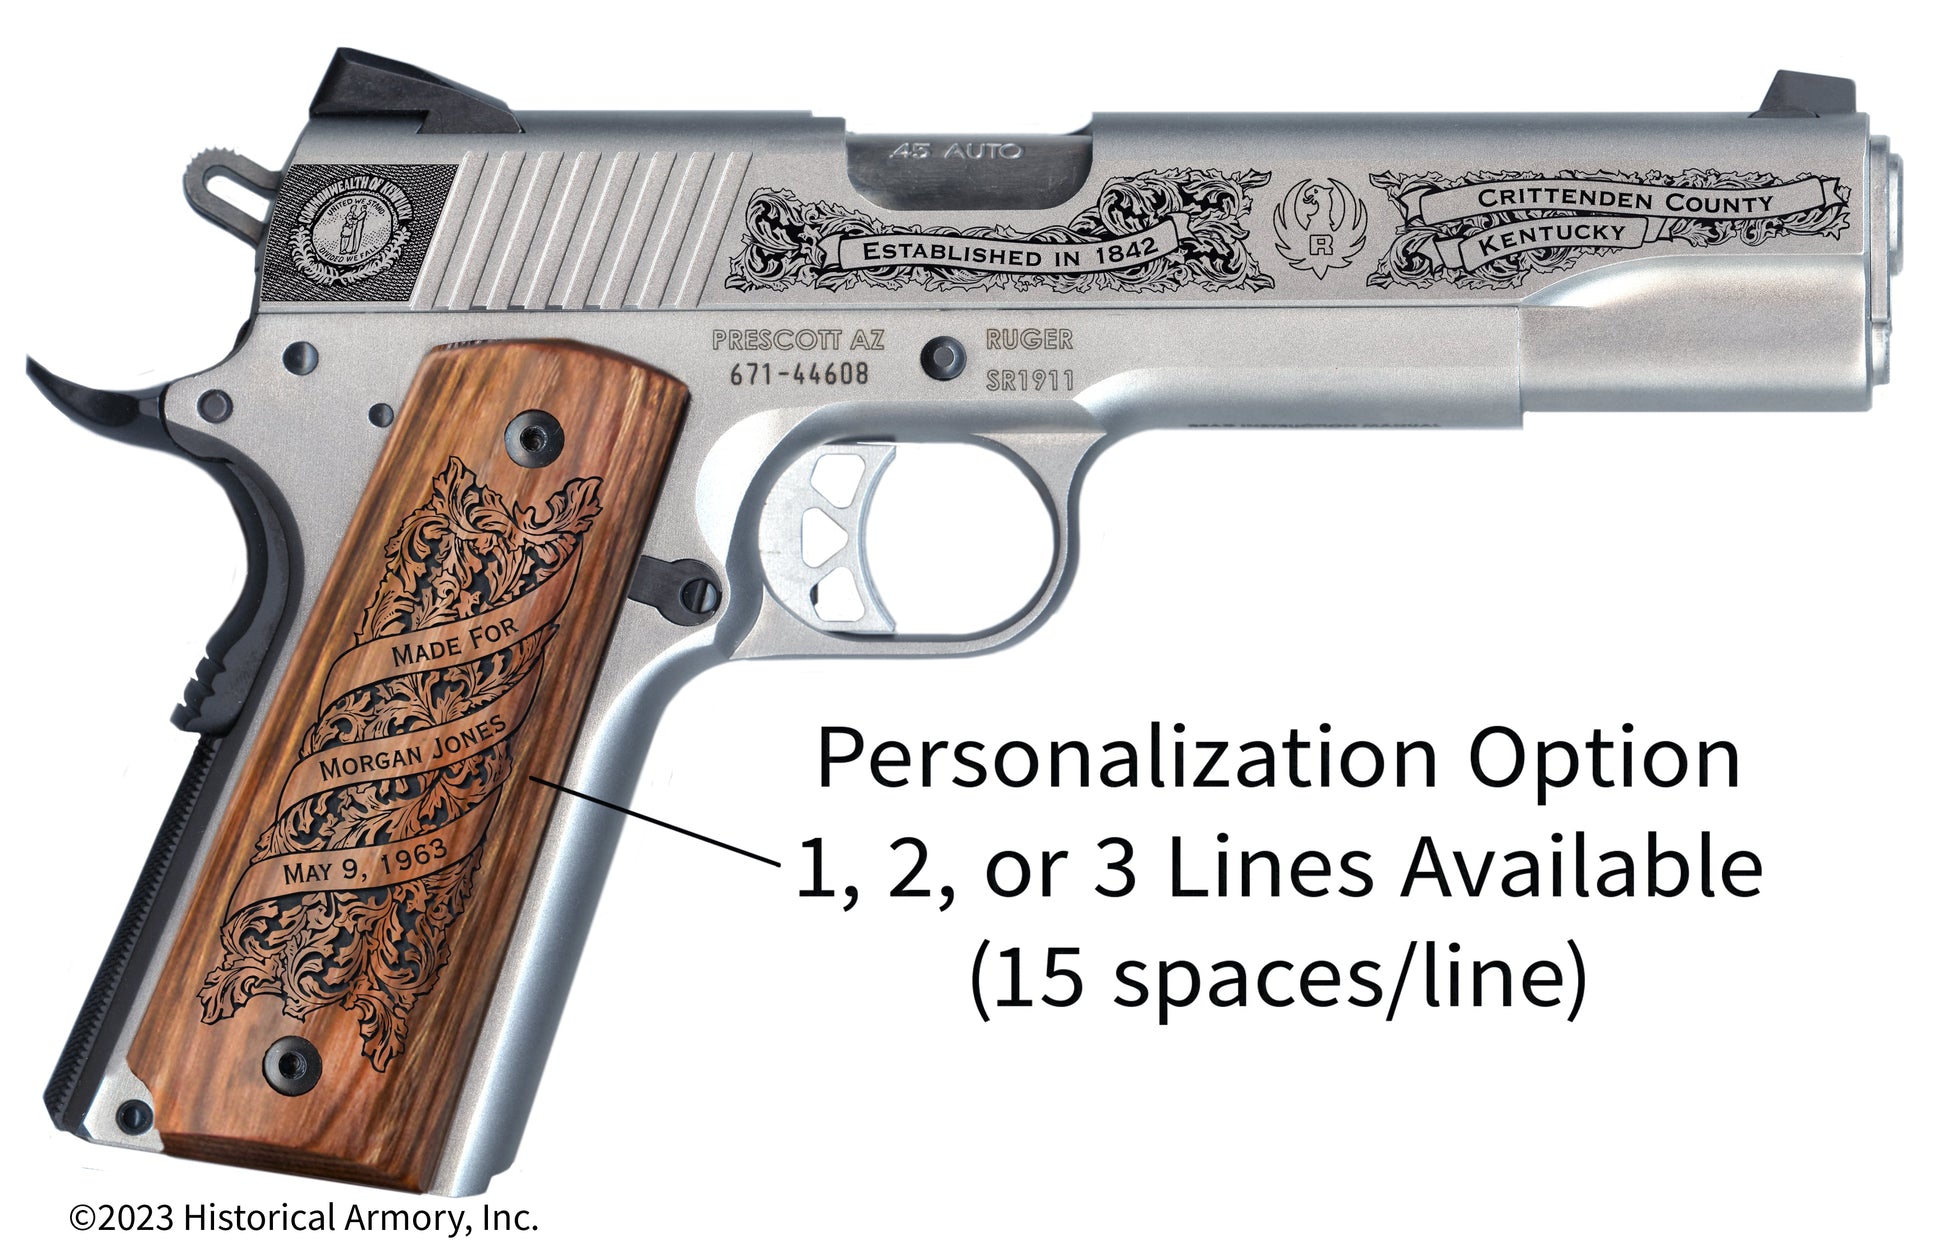 Crittenden County Kentucky Personalized Engraved .45 Auto Ruger 1911